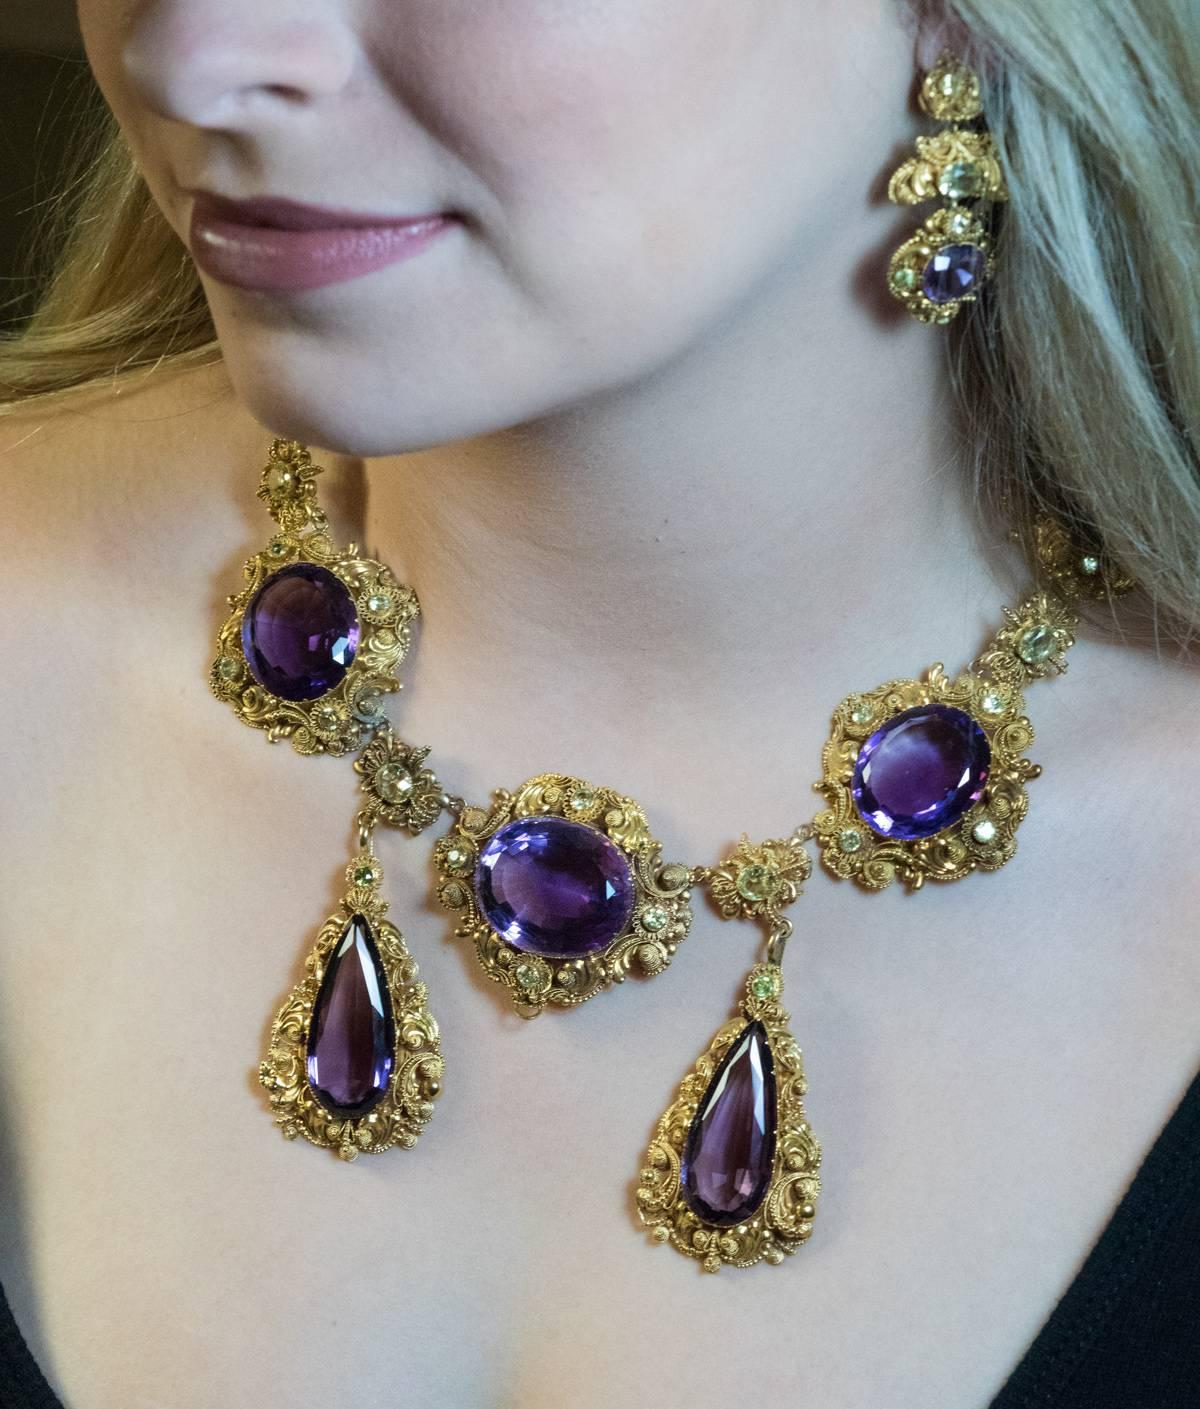 This magnificent antique parure from the late Georgian era, circa 1830, features large faceted amethysts accented by green chrysoberyls set in ornate filigree 15K gold settings.

The parure (early 19th century French name for jewelry sets) consists